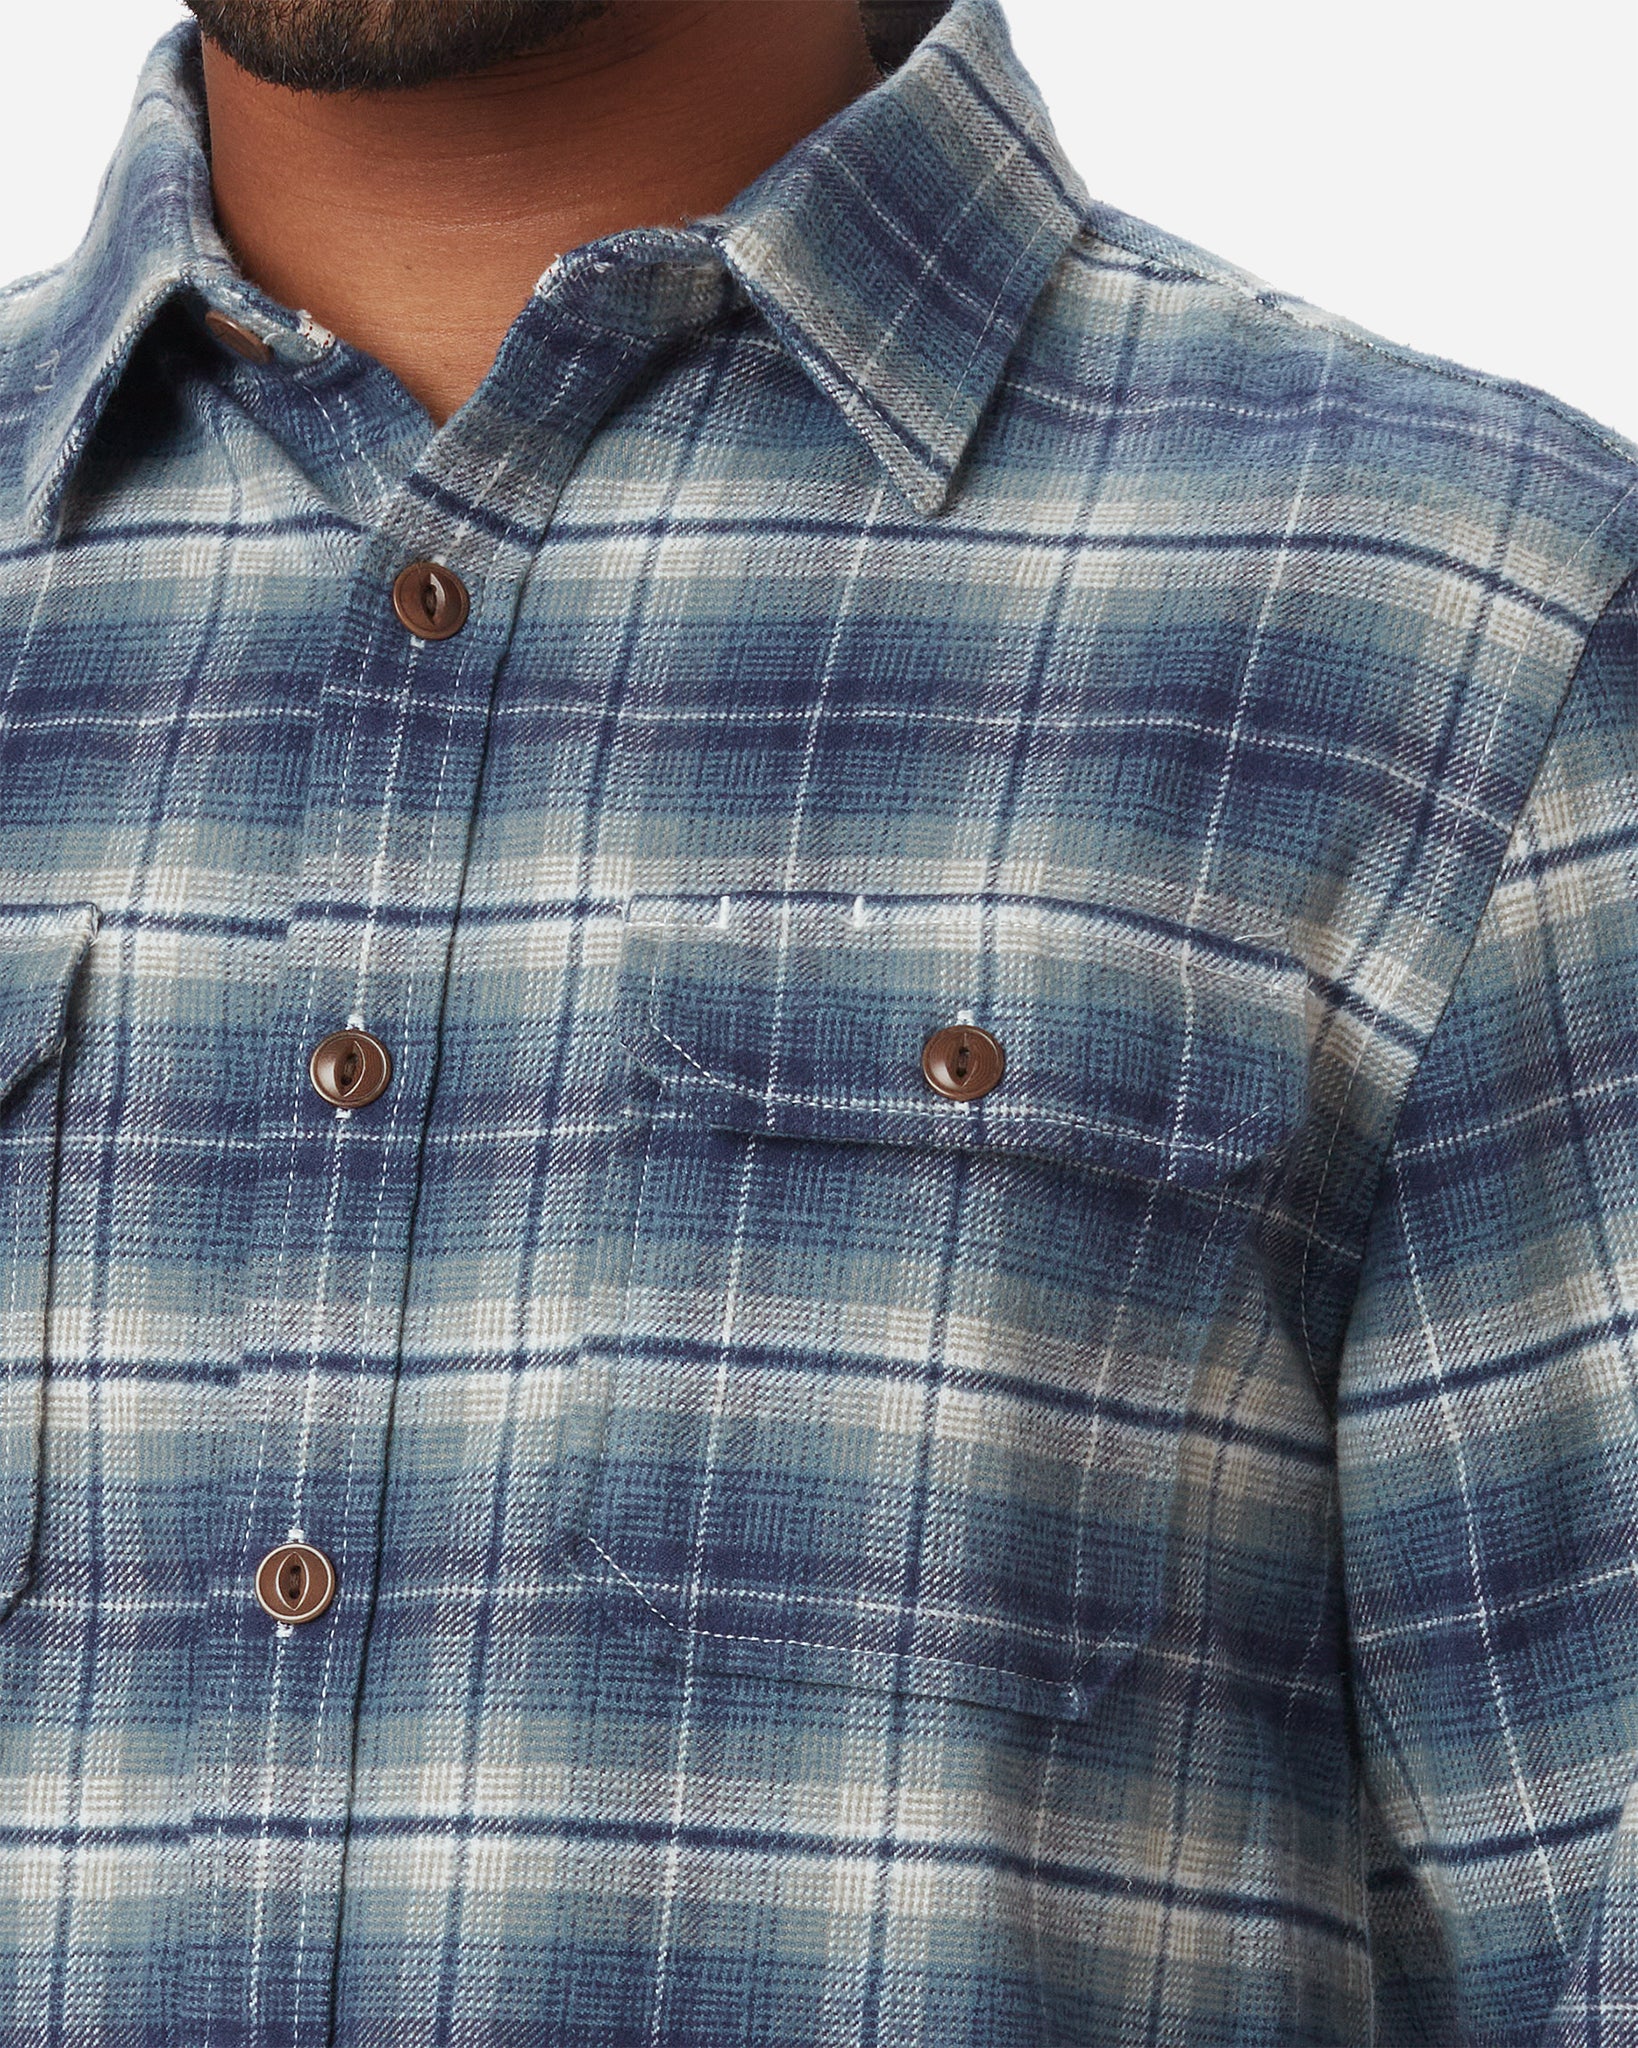 left side of neck, breast pocket, buttons, and collar on men's off white and light blue plaid pattern flannel with brown buttons and white collar stripe